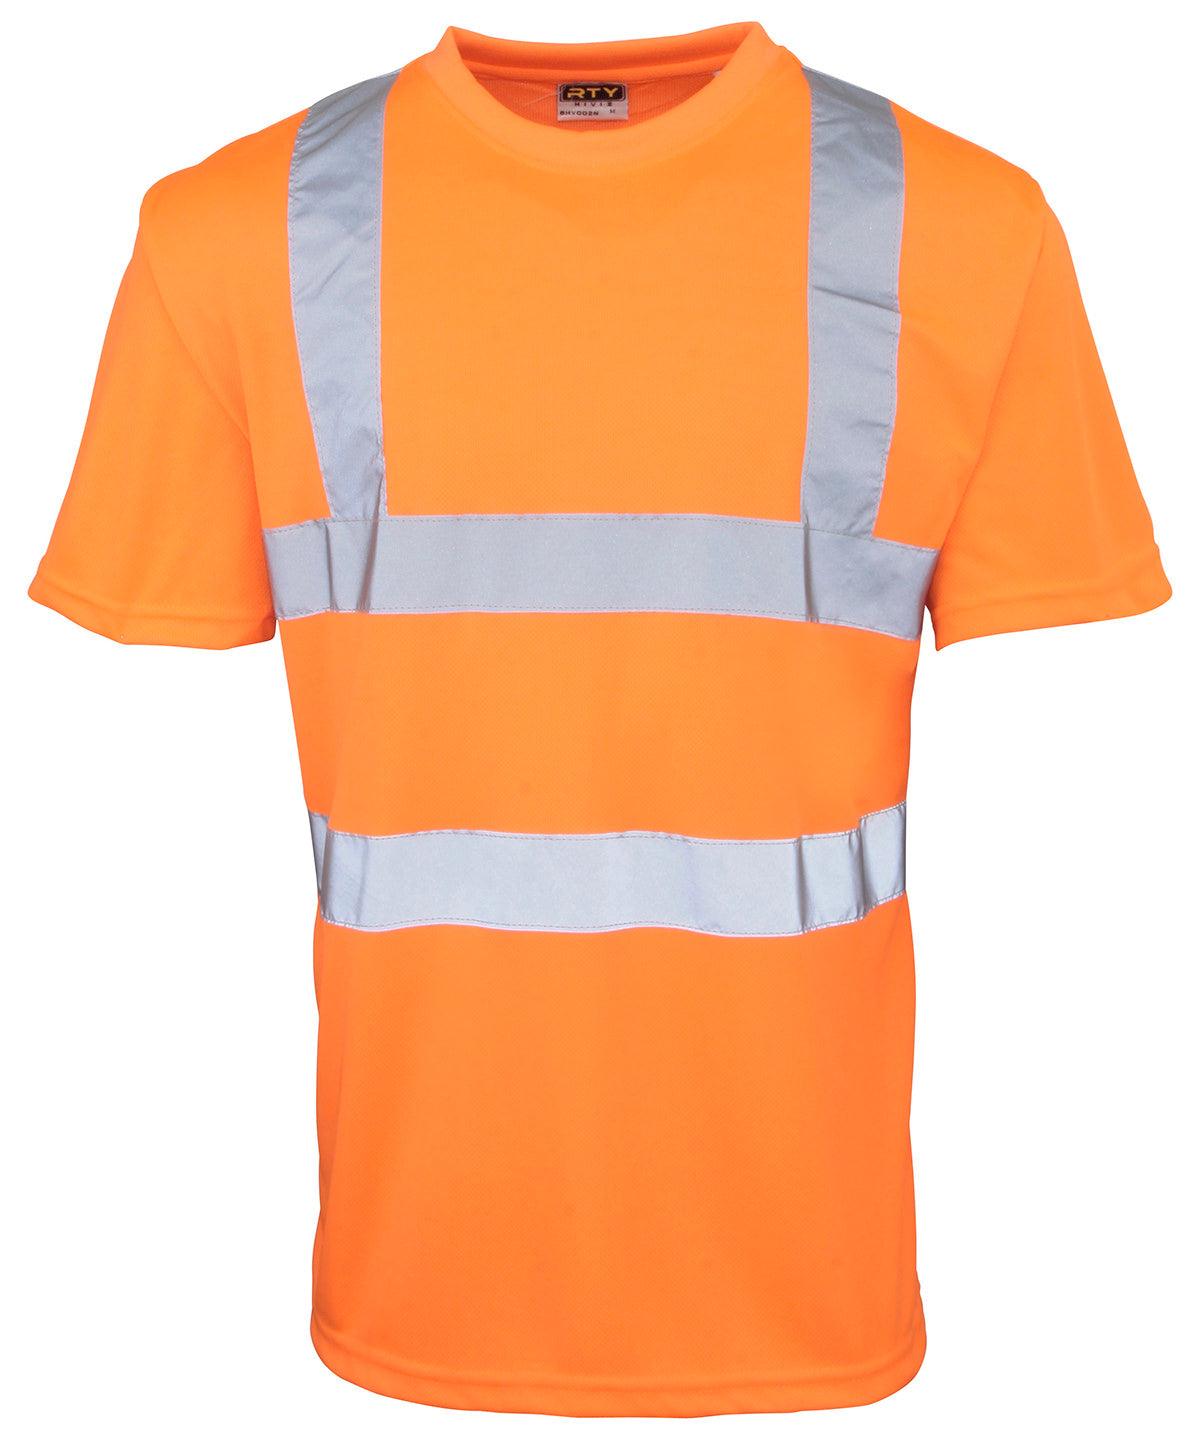 Fluorescent Orange - High visibility t-shirt T-Shirts Last Chance to Buy Plus Sizes, Safetywear, Workwear Schoolwear Centres